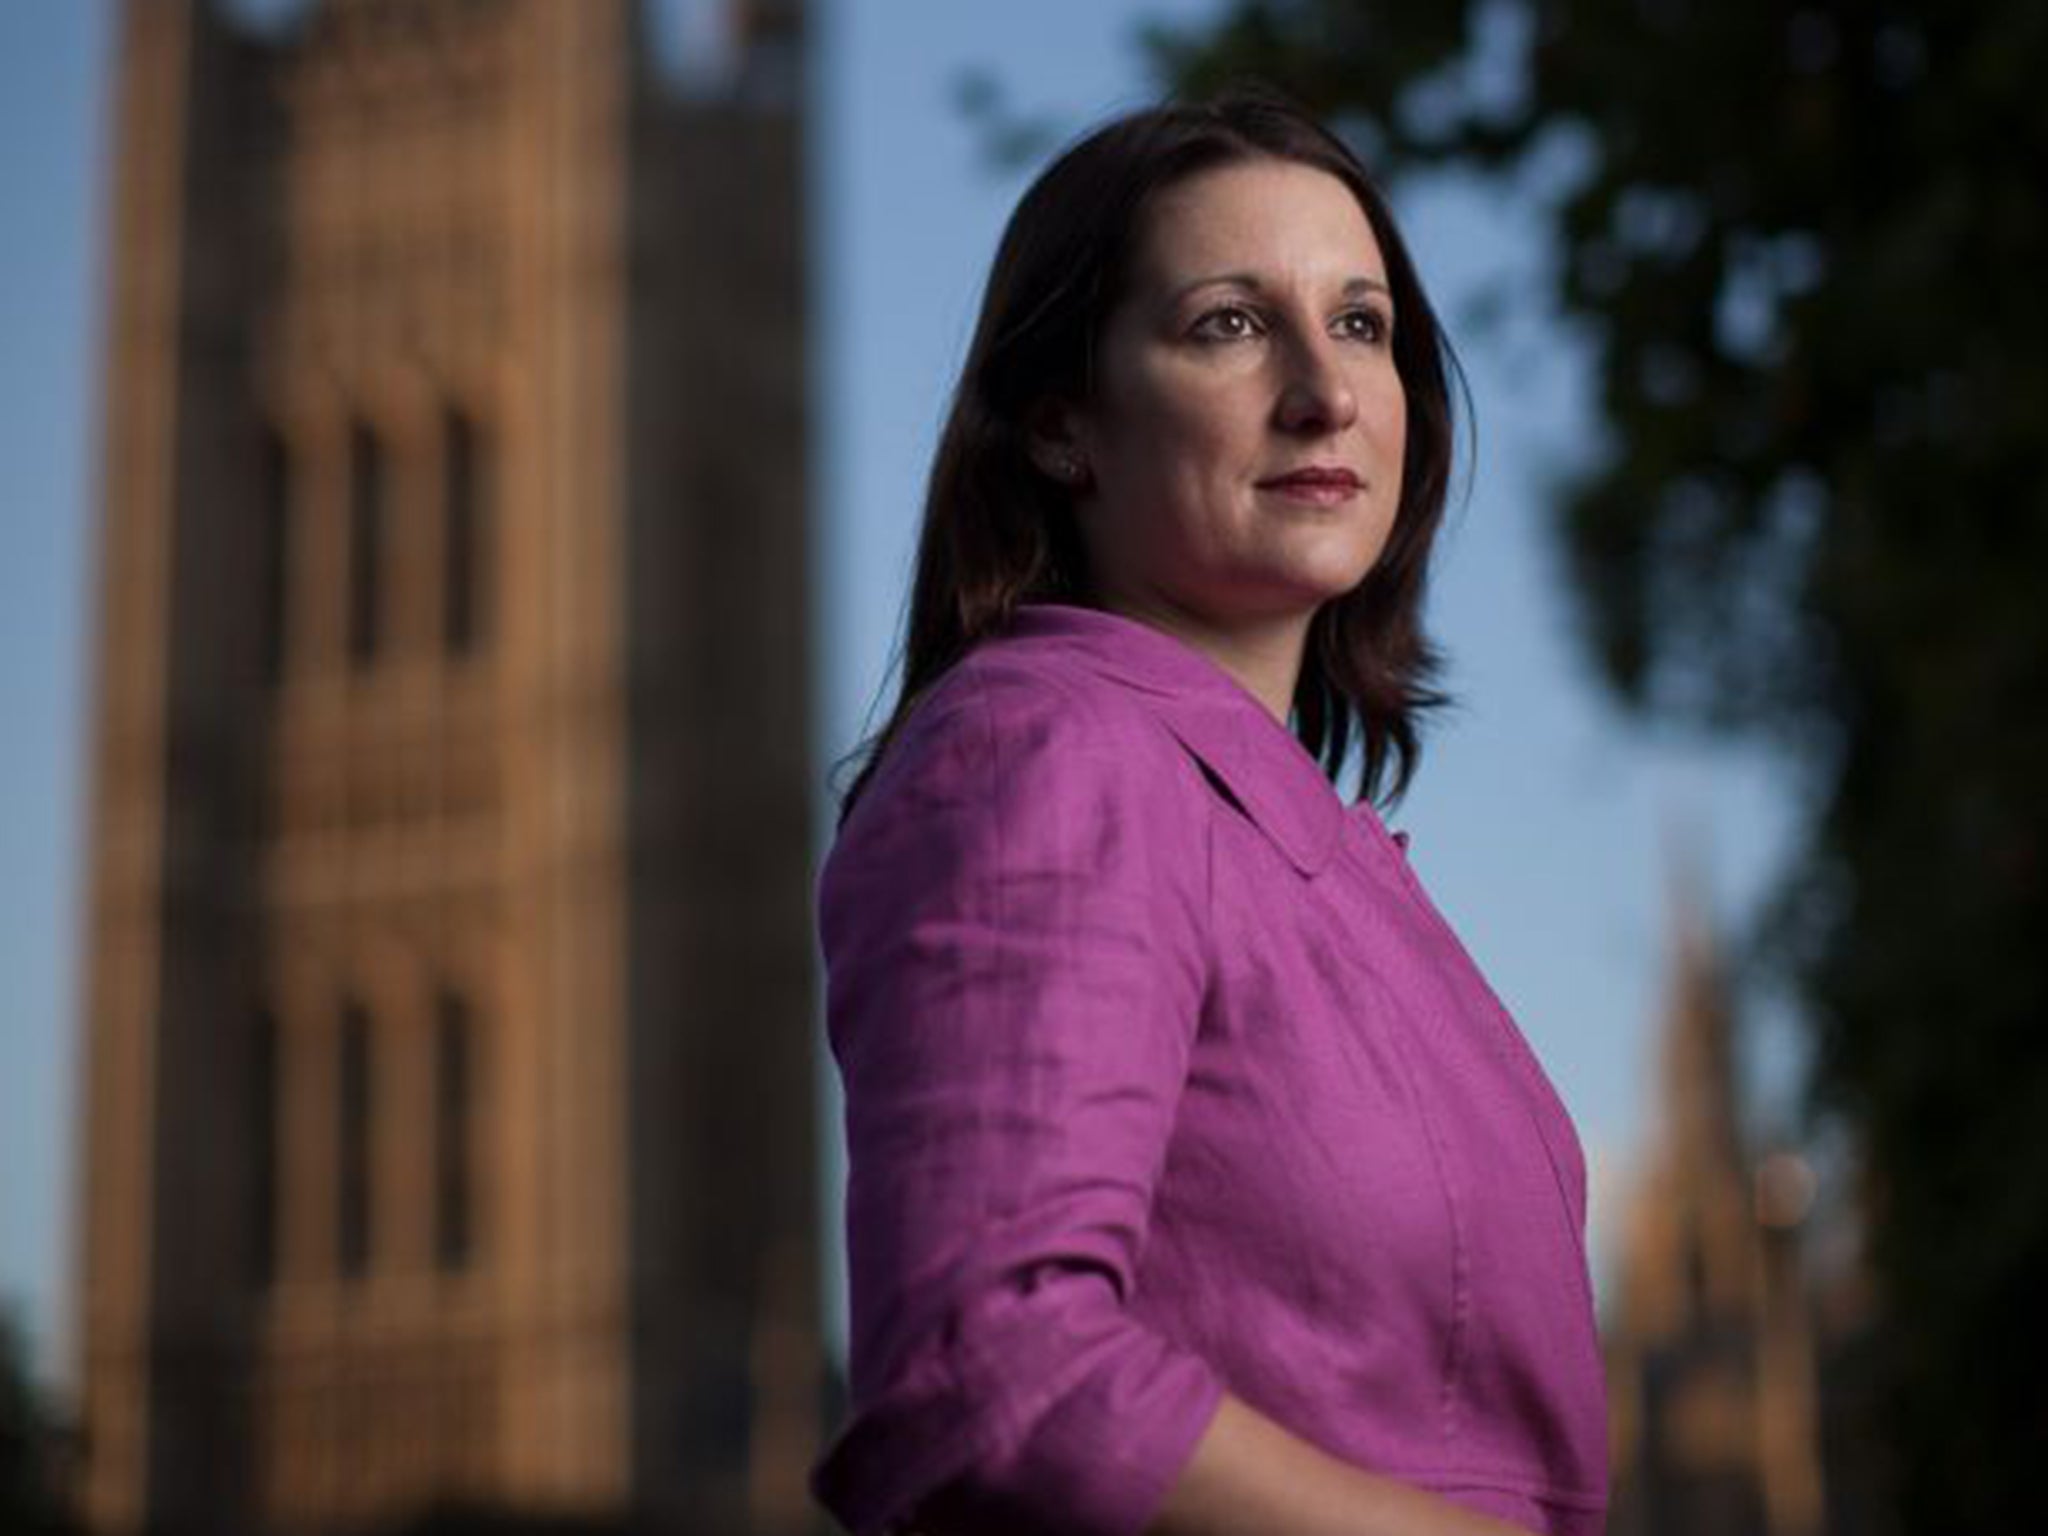 Rachel Reeves is the shadow Work and Pensions Secretary (Jason Alden)